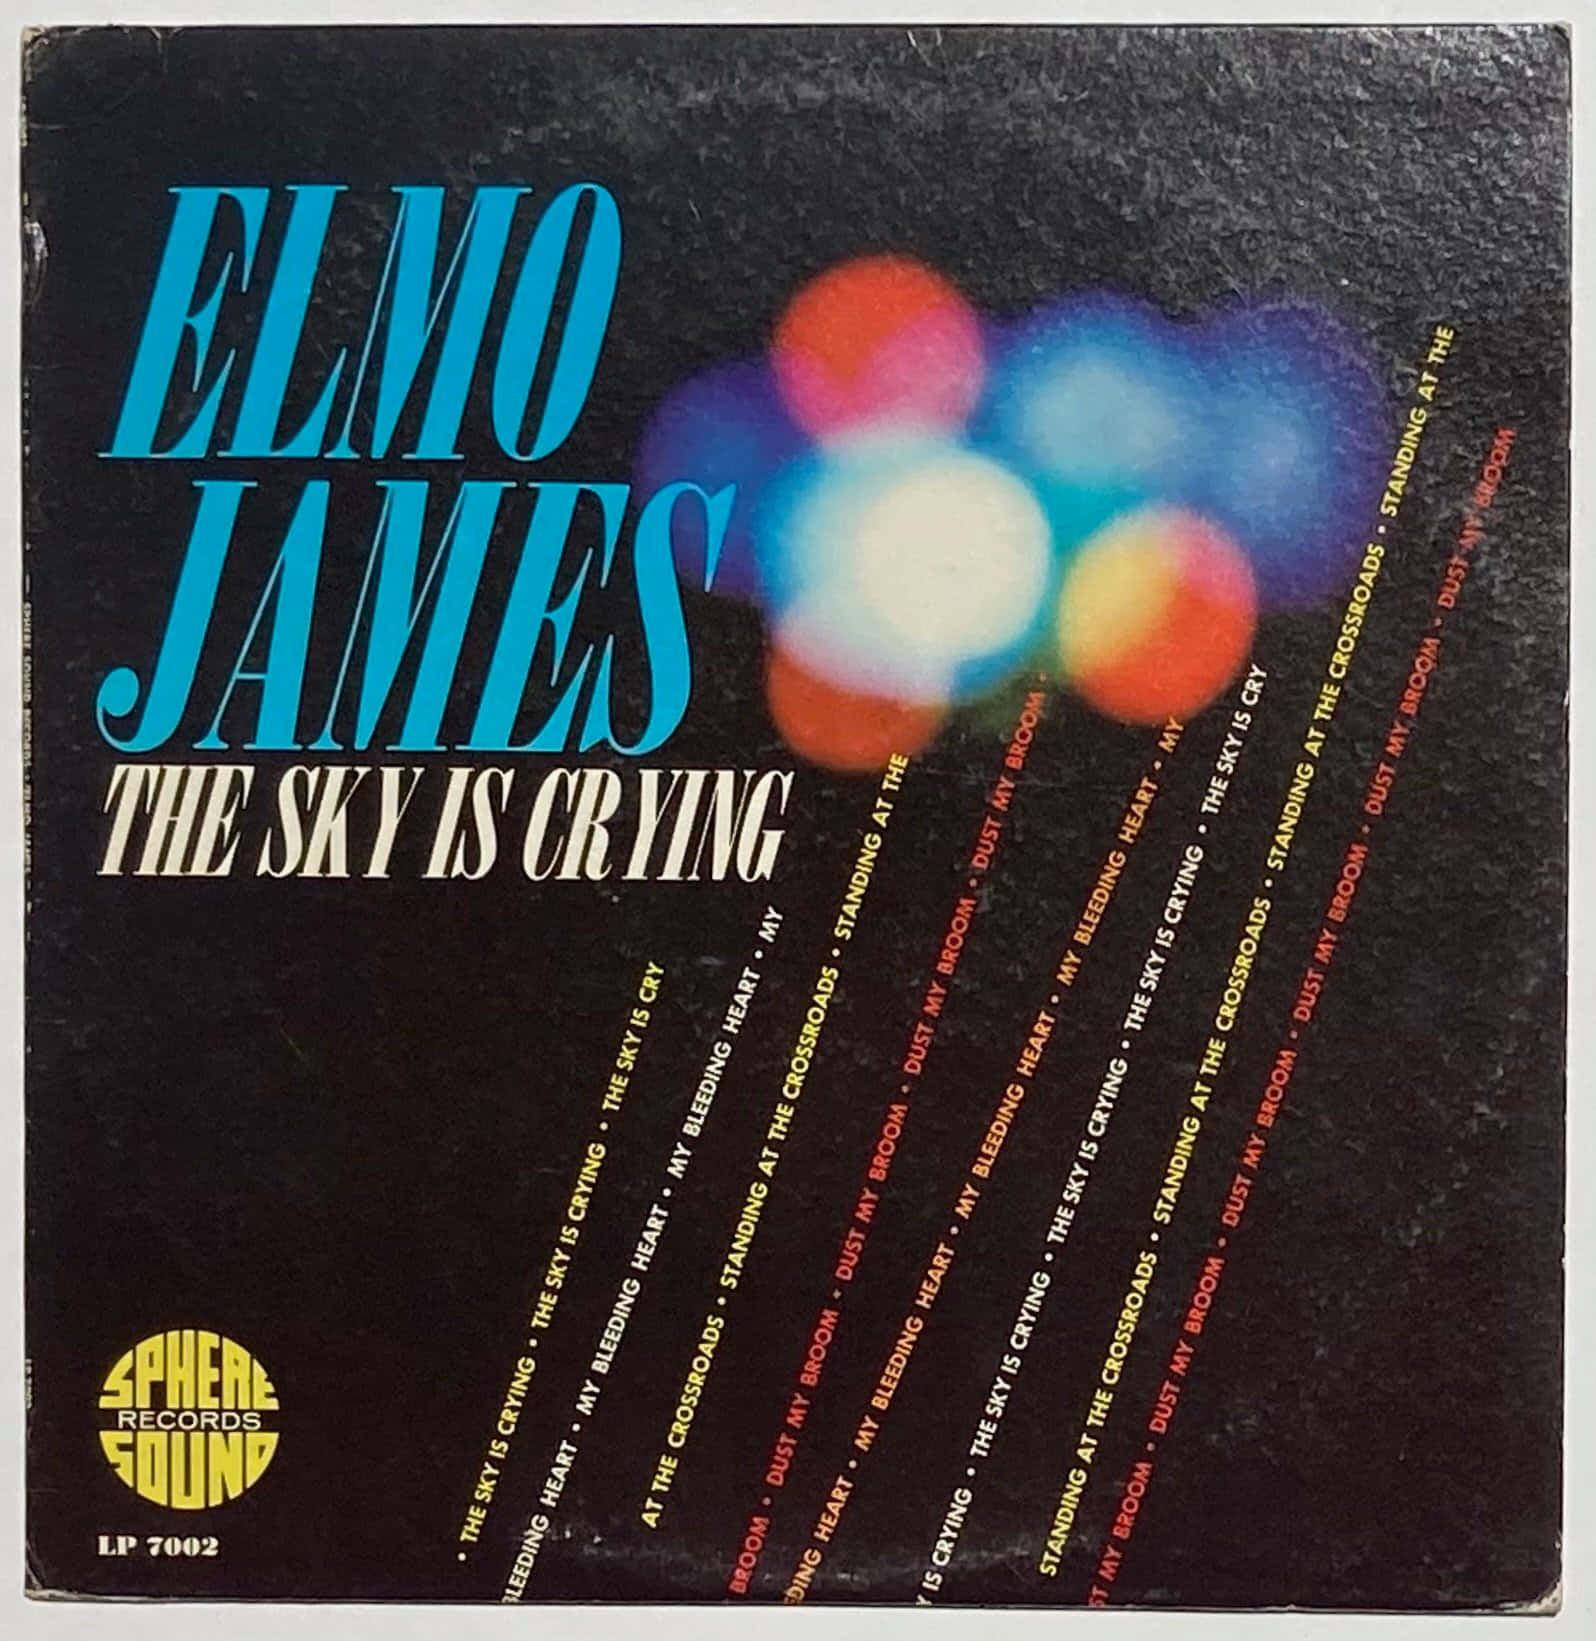 Elmore James The Sky Is Crying Wallpaper